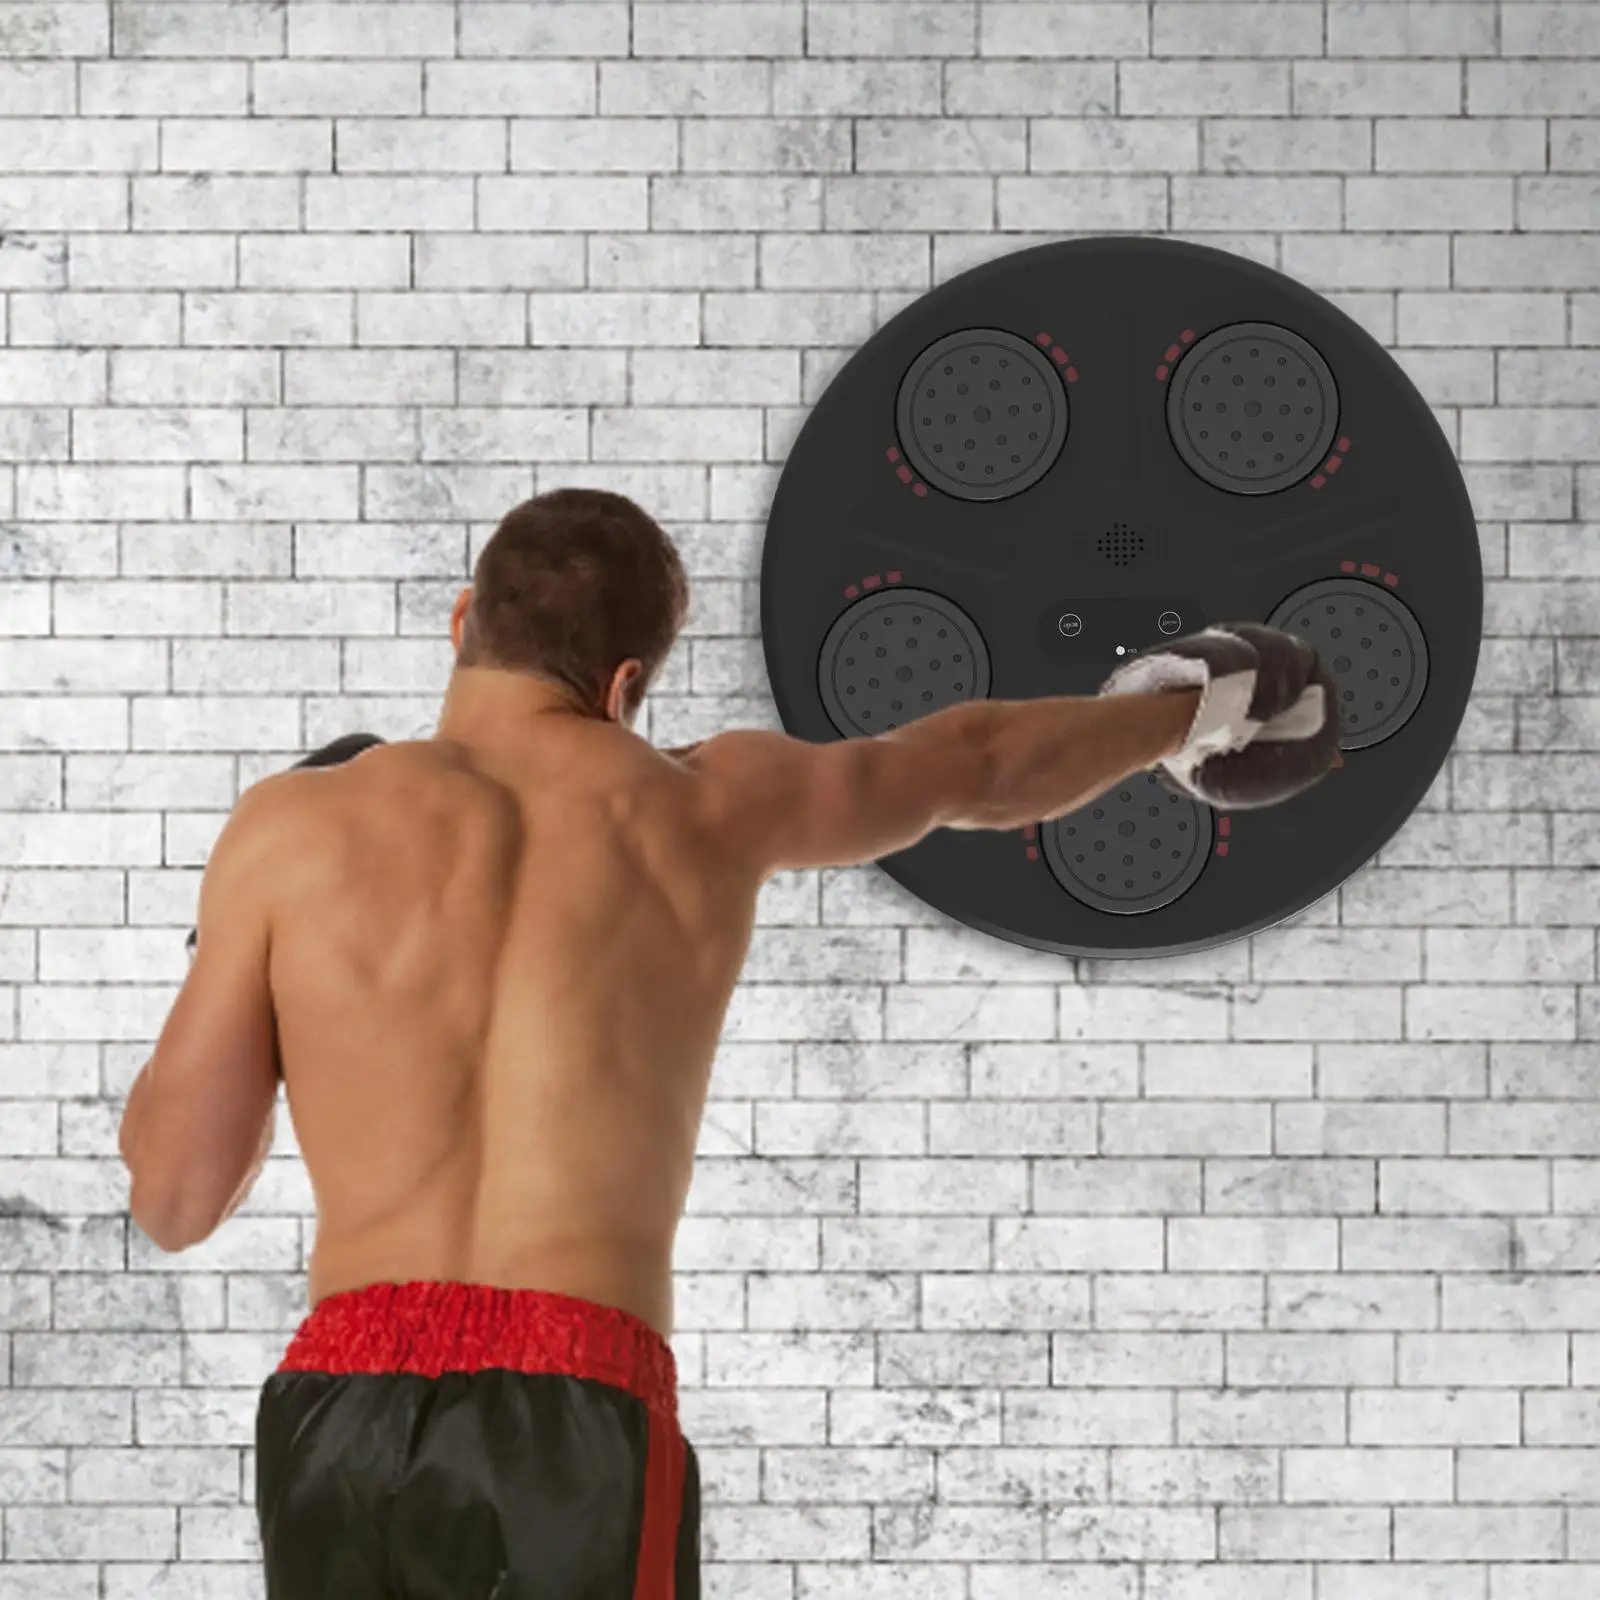 Smart Music Boxing Machine Wall Mounted Sports Musical Target Reaction Times